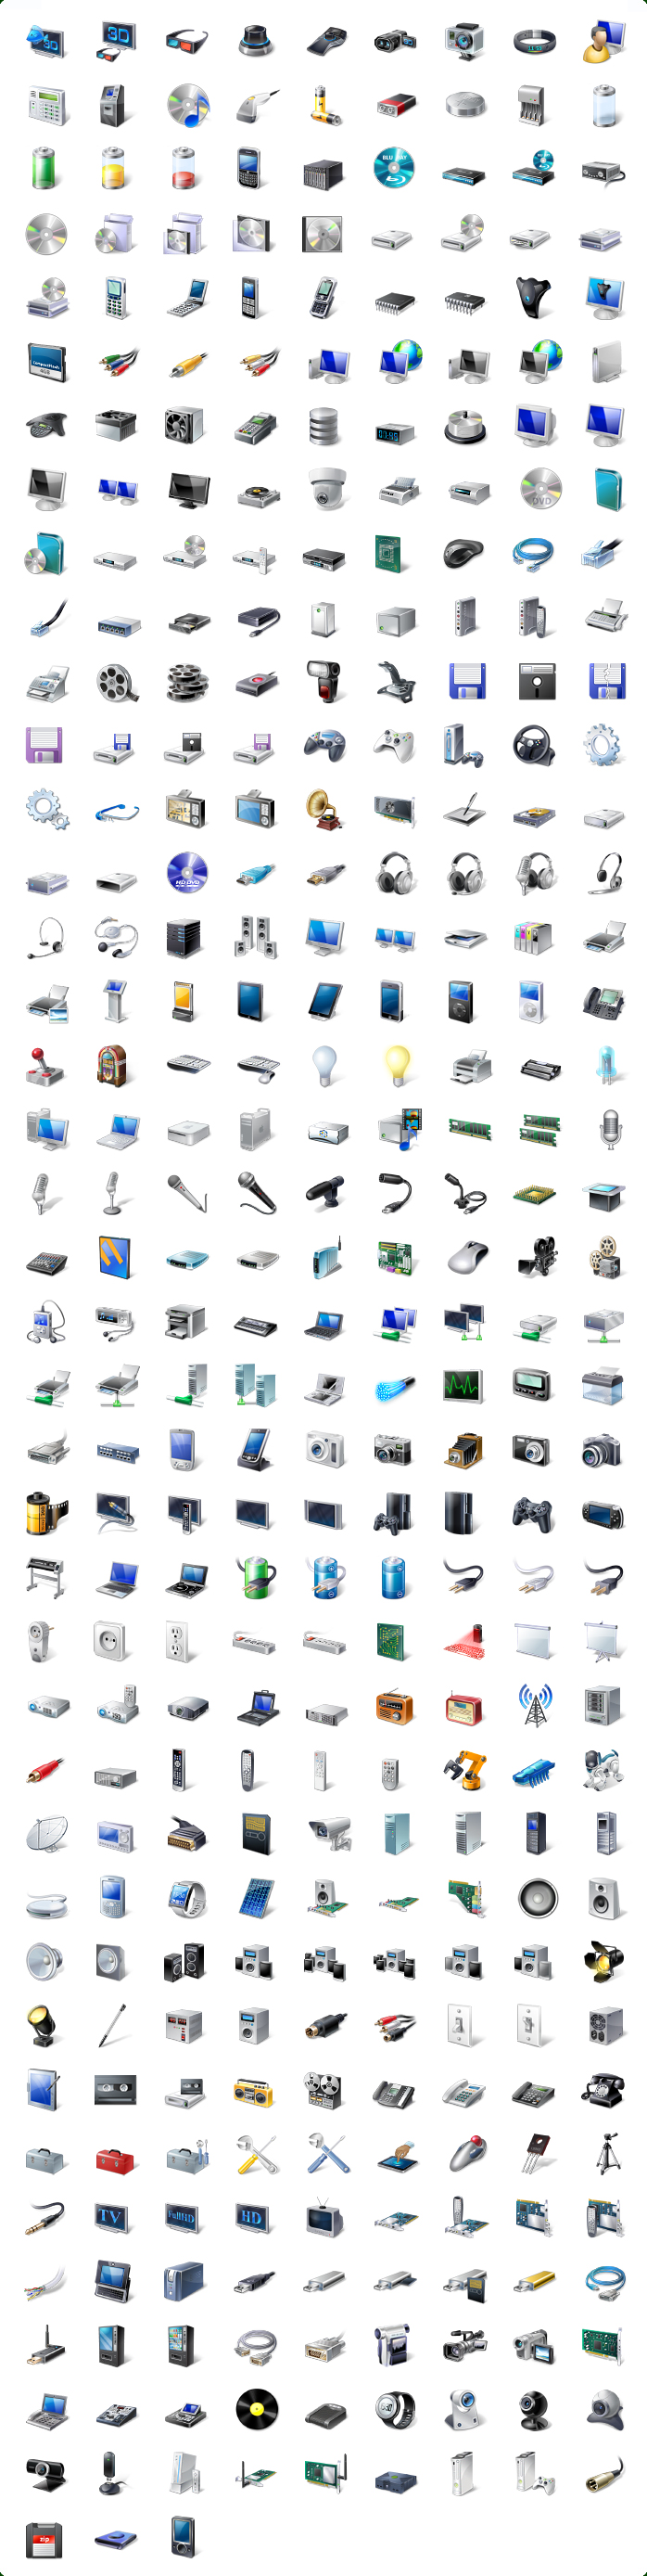 Hardware Icons, Devices Icons